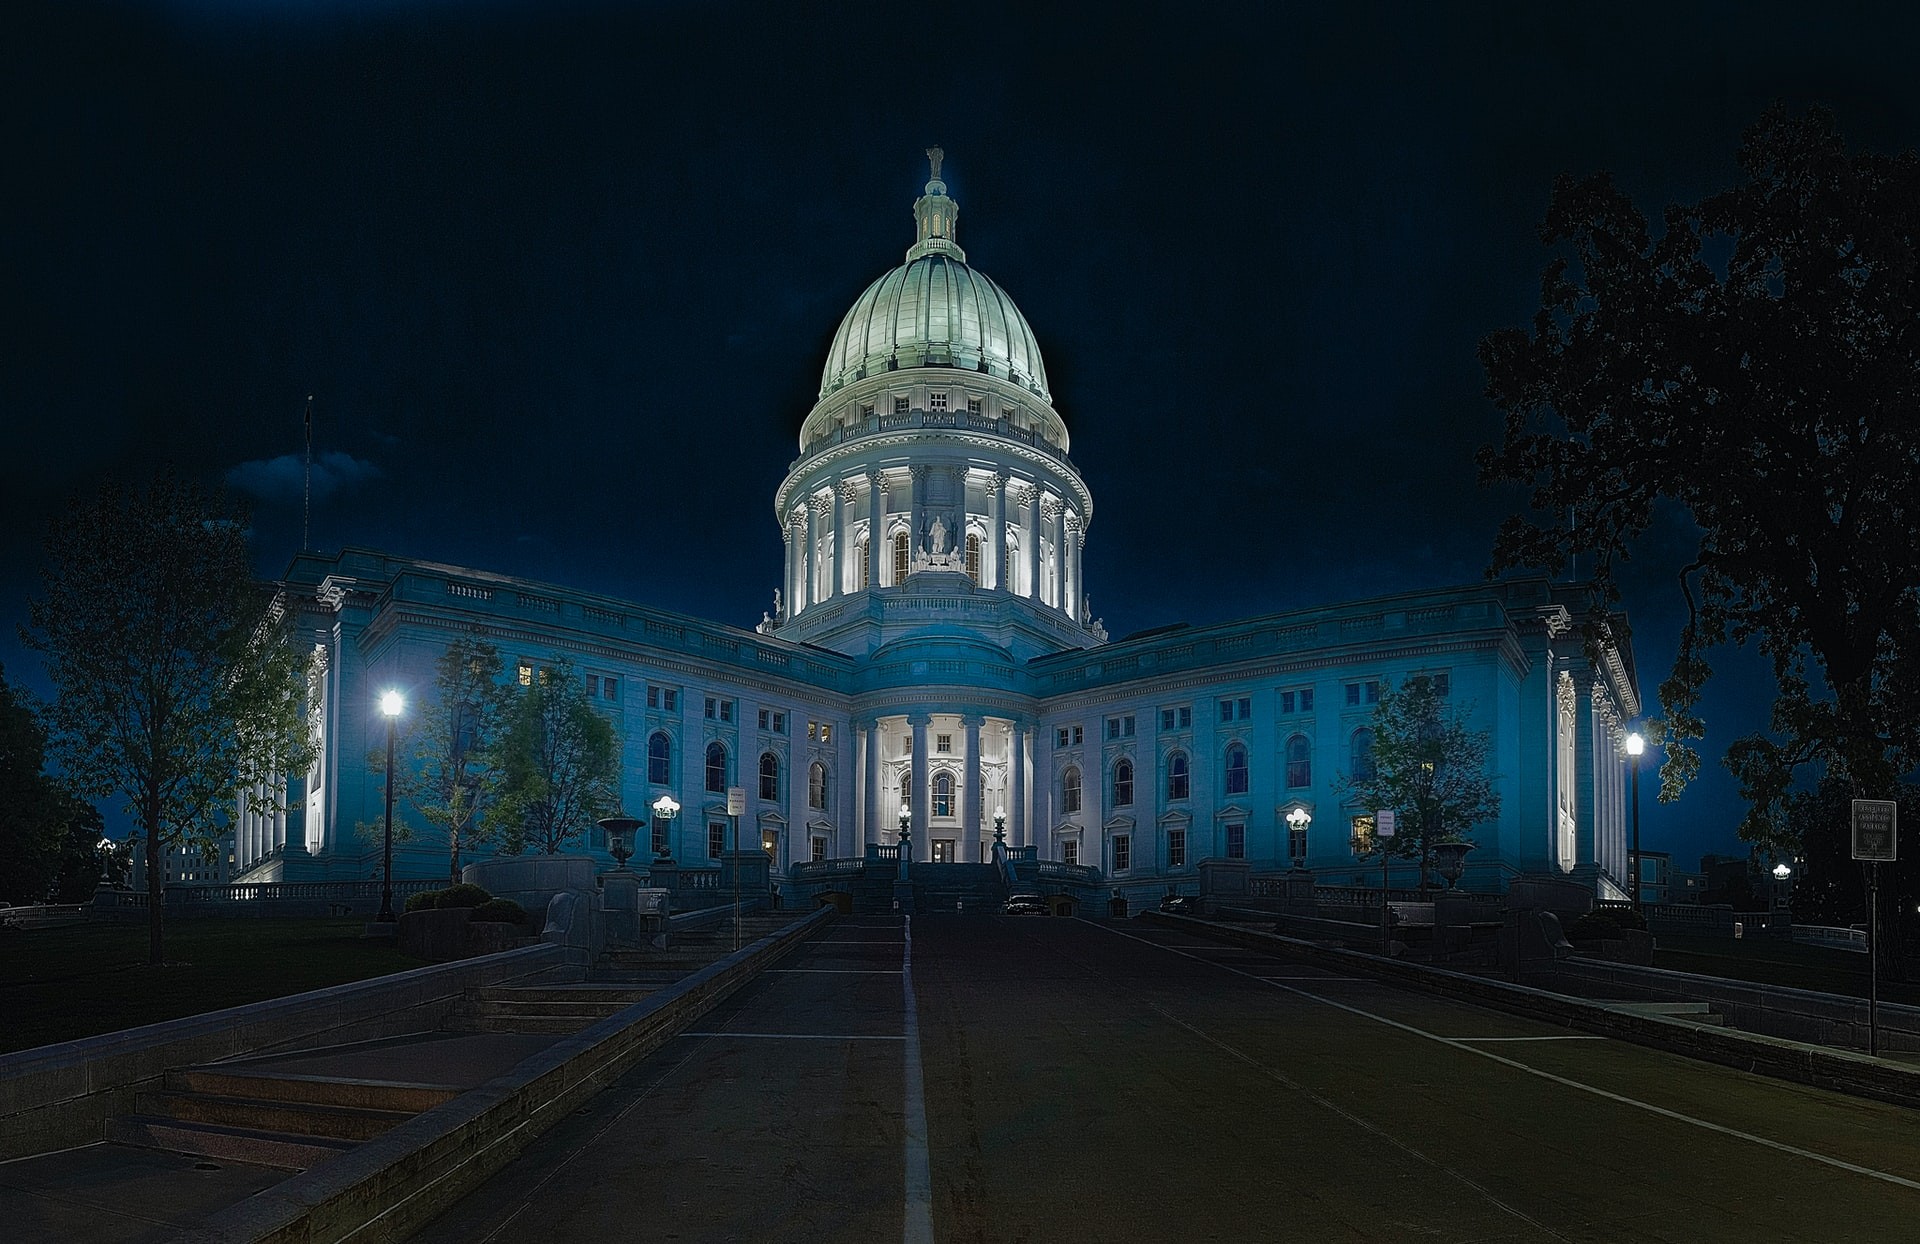 Capital of the United States : Night Building lit up